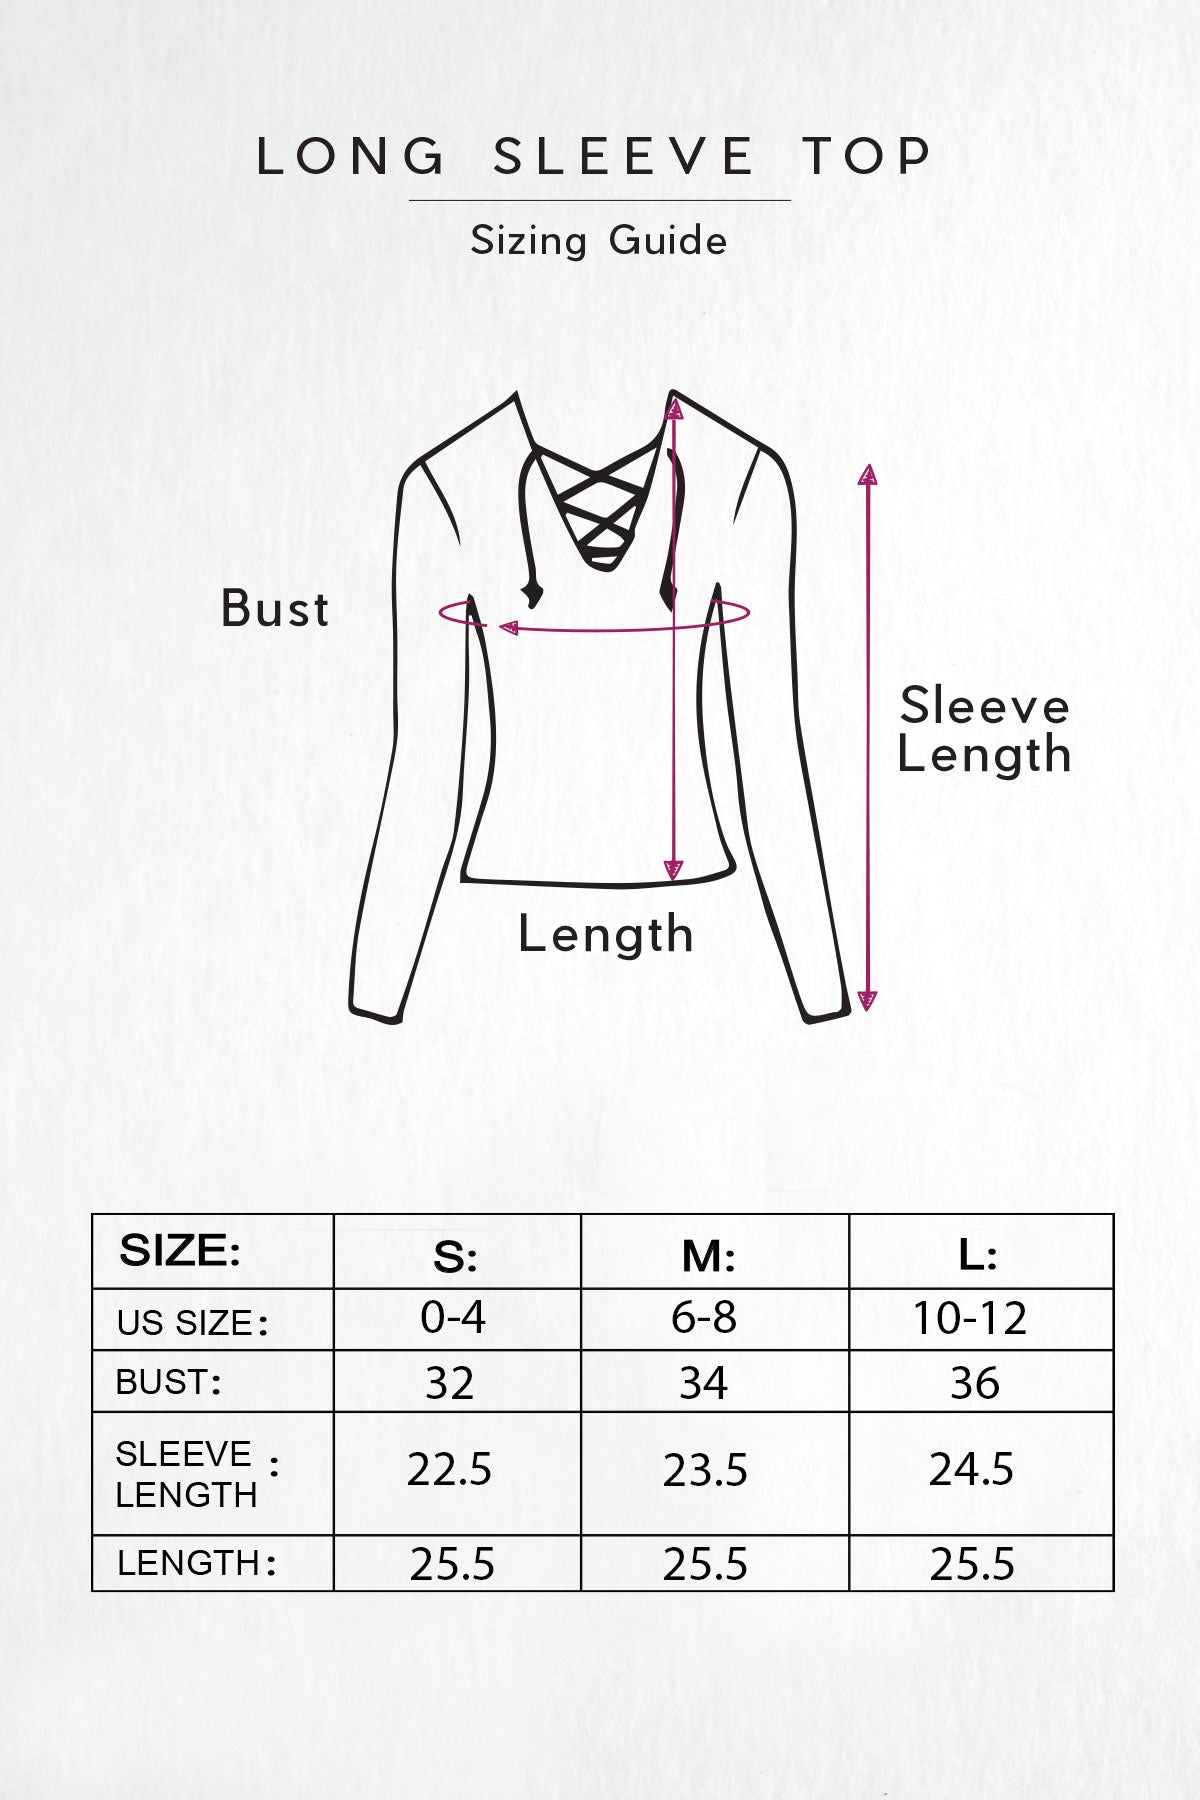 Long Sleeve Top Sizing Guide